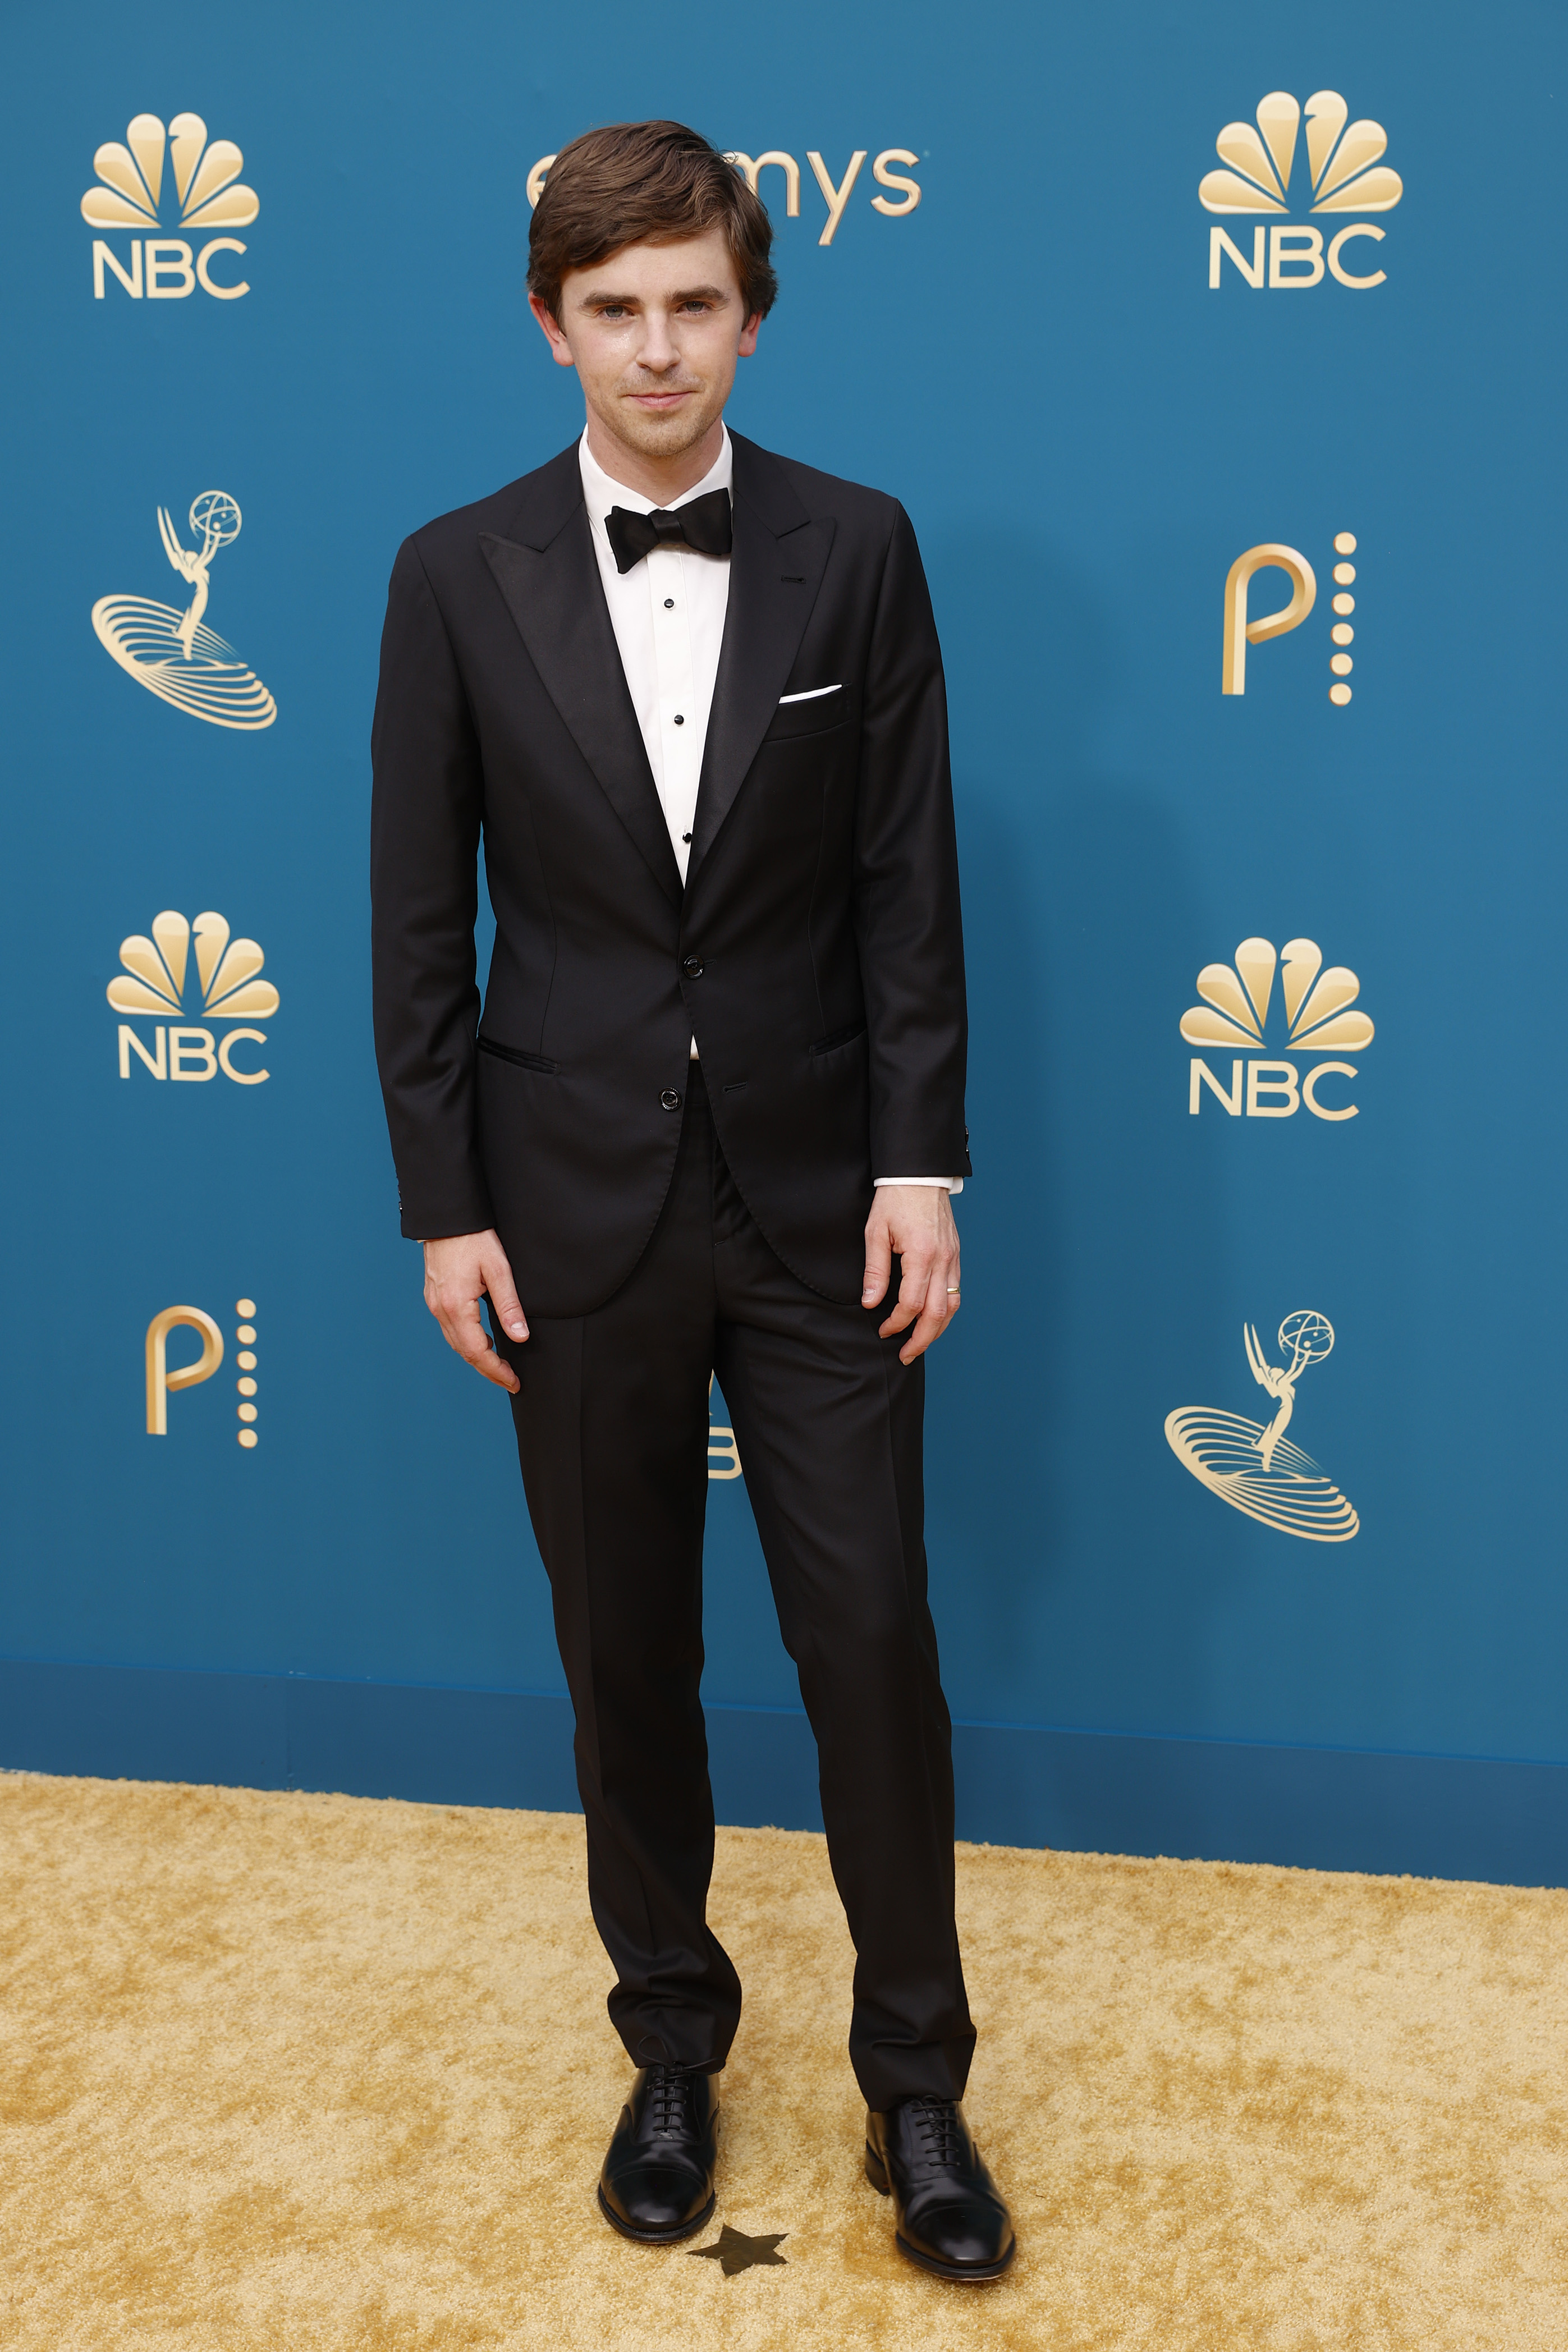 Freddie Highmore arrives to the 74th Annual Primetime Emmy Awards held at the Microsoft Theater on September 12, 2022. | Source: Getty Images